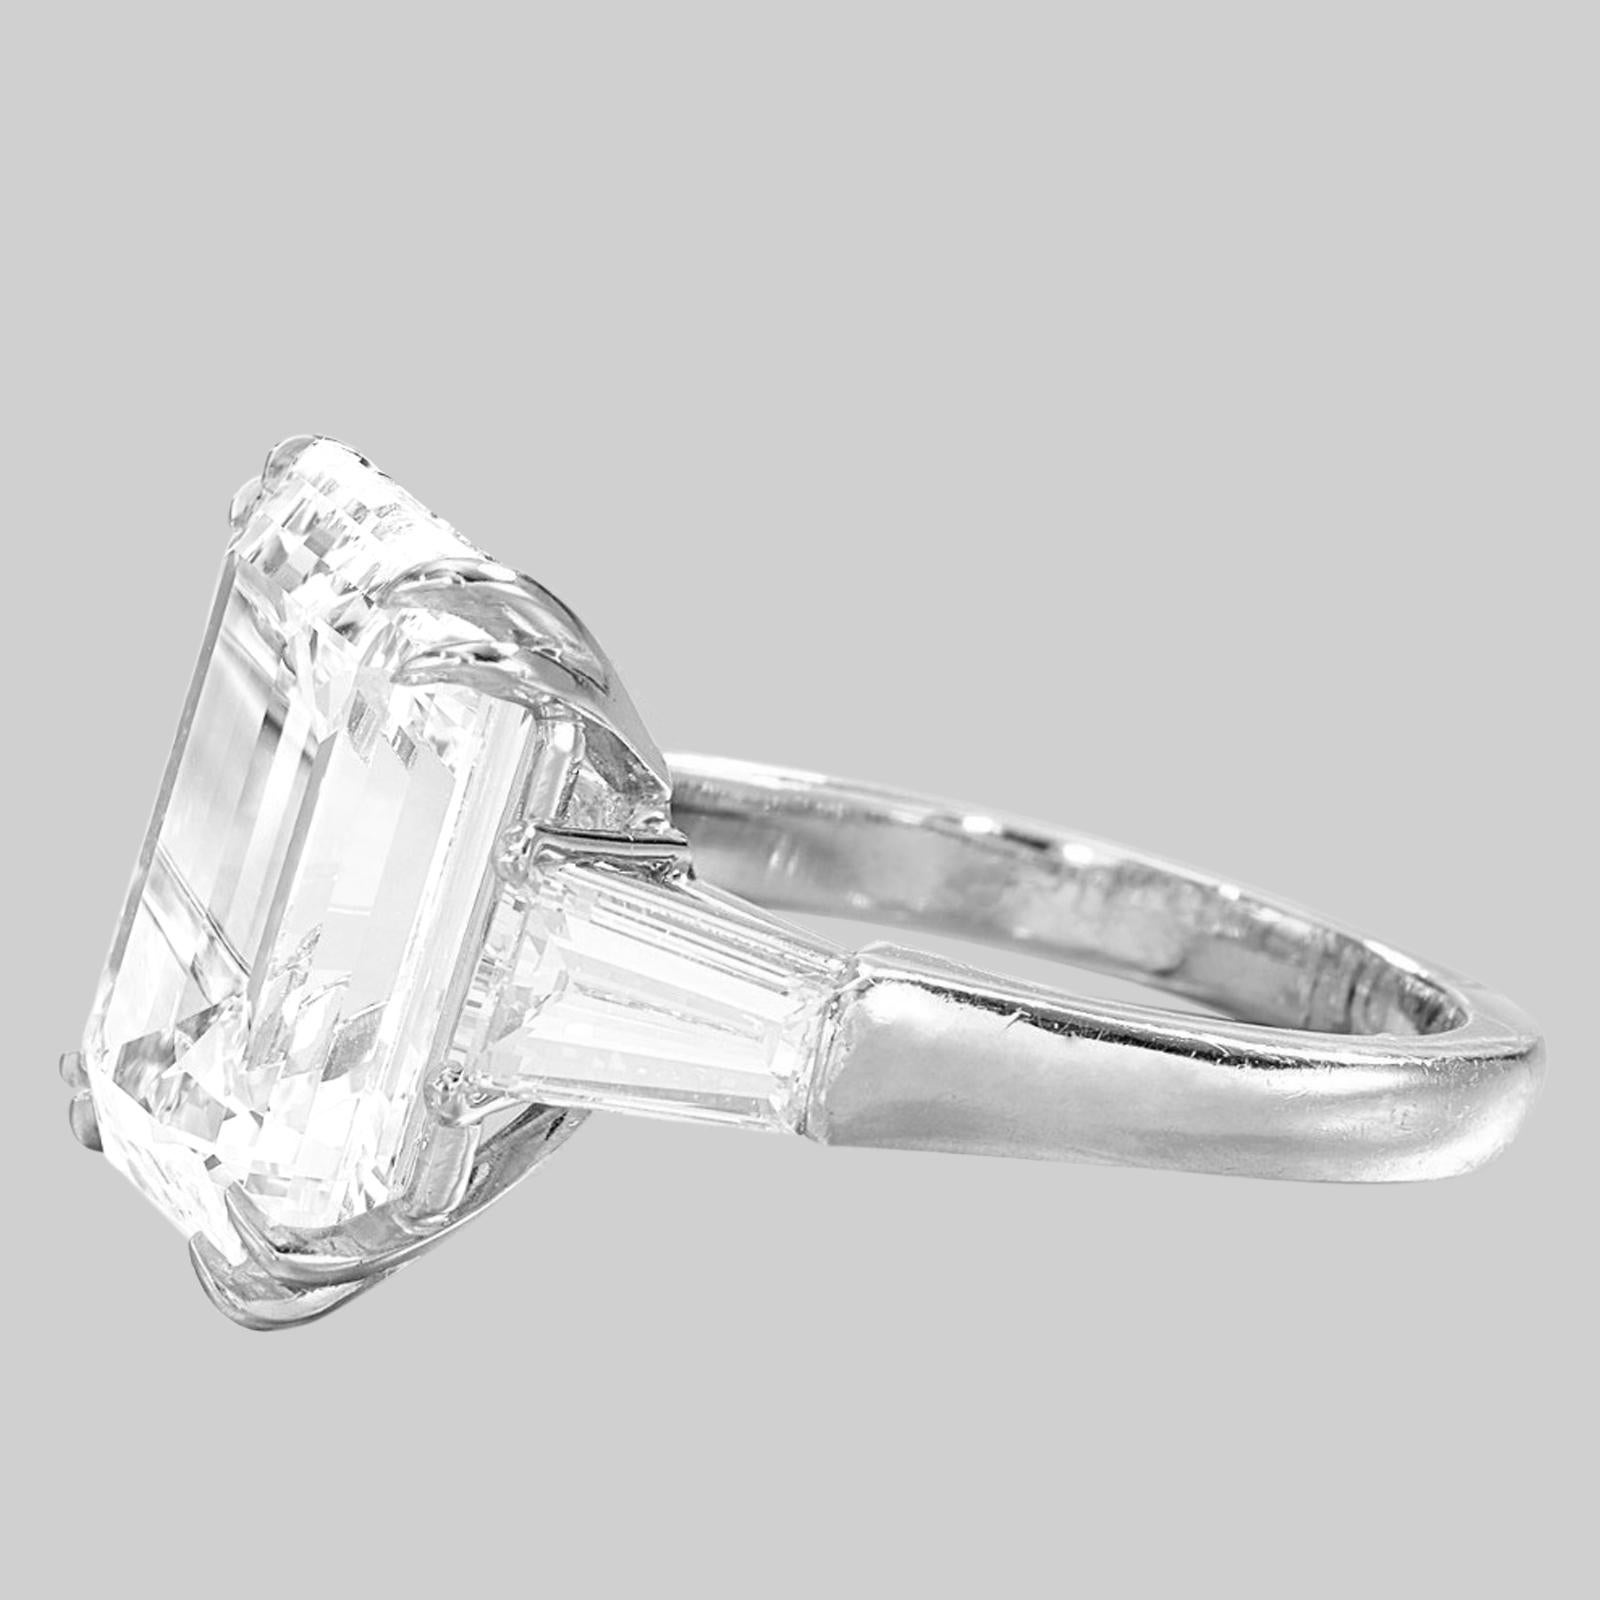 
Introducing an exquisite ring adorned with a magnificent 10-carat emerald-cut diamond of flawless clarity and color. The diamonds on the meticulously crafted mounting weigh approximately 1 carat in total. The center diamond is certified by GIA,